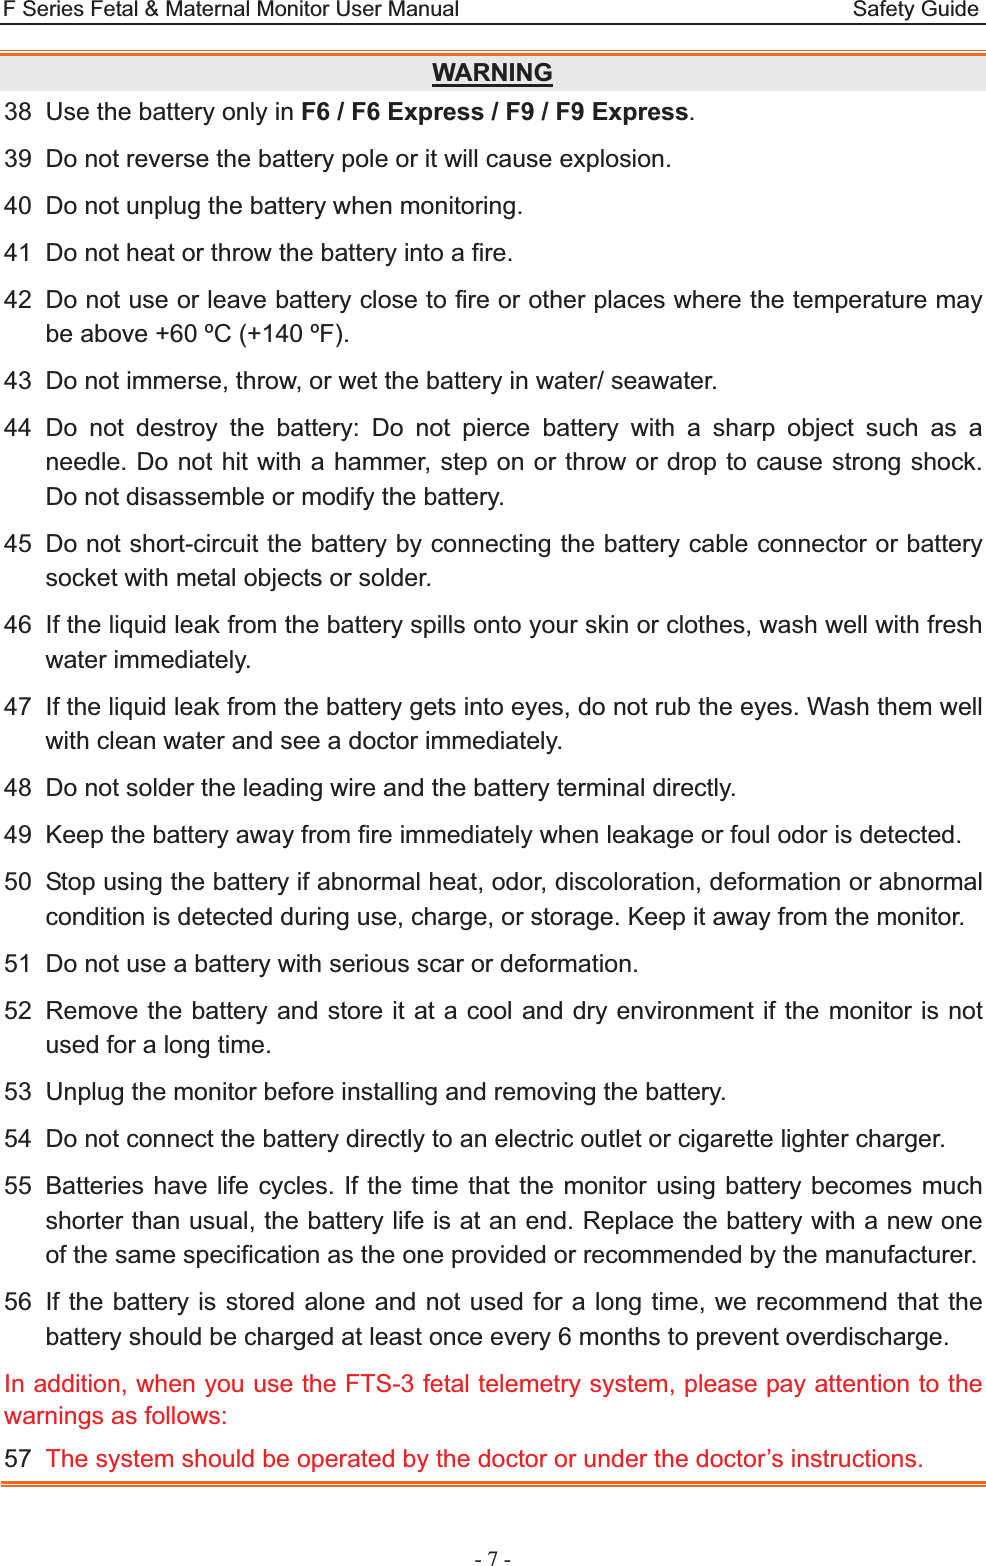 F Series Fetal &amp; Maternal Monitor User Manual                                    Safety Guide - 7 - WARNING38  Use the battery only in F6 / F6 Express / F9 / F9 Express. 39  Do not reverse the battery pole or it will cause explosion. 40  Do not unplug the battery when monitoring. 41  Do not heat or throw the battery into a fire. 42  Do not use or leave battery close to fire or other places where the temperature may be above +60 ºC (+140 ºF). 43  Do not immerse, throw, or wet the battery in water/ seawater. 44 Do not destroy the battery: Do not pierce battery with a sharp object such as a needle. Do not hit with a hammer, step on or throw or drop to cause strong shock. Do not disassemble or modify the battery. 45  Do not short-circuit the battery by connecting the battery cable connector or battery socket with metal objects or solder. 46  If the liquid leak from the battery spills onto your skin or clothes, wash well with fresh water immediately. 47  If the liquid leak from the battery gets into eyes, do not rub the eyes. Wash them well with clean water and see a doctor immediately. 48  Do not solder the leading wire and the battery terminal directly. 49  Keep the battery away from fire immediately when leakage or foul odor is detected. 50  Stop using the battery if abnormal heat, odor, discoloration, deformation or abnormal condition is detected during use, charge, or storage. Keep it away from the monitor. 51  Do not use a battery with serious scar or deformation. 52  Remove the battery and store it at a cool and dry environment if the monitor is not used for a long time. 53  Unplug the monitor before installing and removing the battery. 54  Do not connect the battery directly to an electric outlet or cigarette lighter charger. 55  Batteries have life cycles. If the time that the monitor using battery becomes much shorter than usual, the battery life is at an end. Replace the battery with a new one of the same specification as the one provided or recommended by the manufacturer. 56  If the battery is stored alone and not used for a long time, we recommend that the battery should be charged at least once every 6 months to prevent overdischarge. In addition, when you use the FTS-3 fetal telemetry system, please pay attention to the warnings as follows: 57  The system should be operated by the doctor or under the doctor’s instructions. 